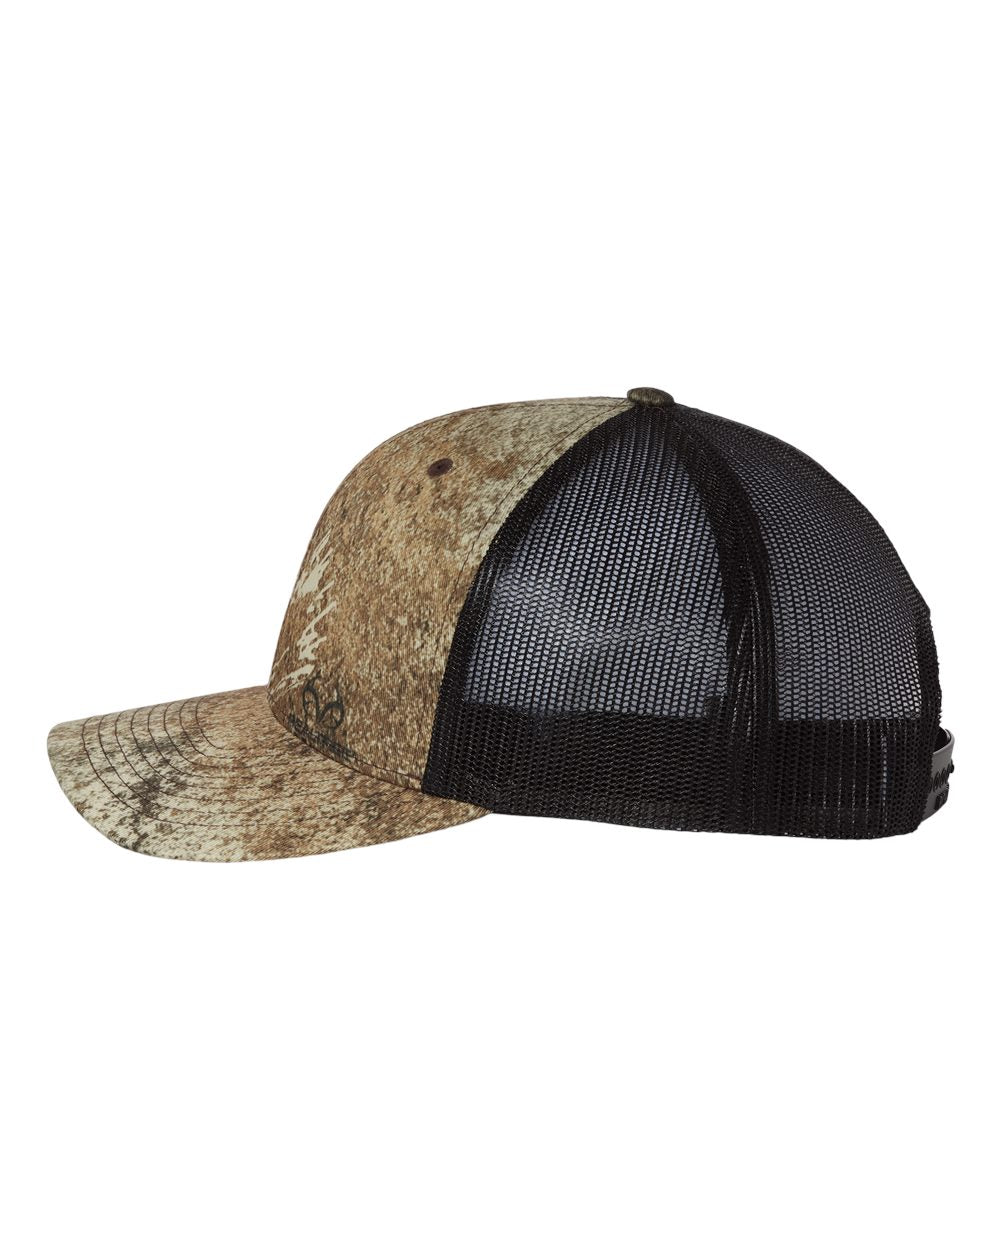 Titty Bells 3D Patterned Snapback Trucker Hat- Realtree Excape/ Black